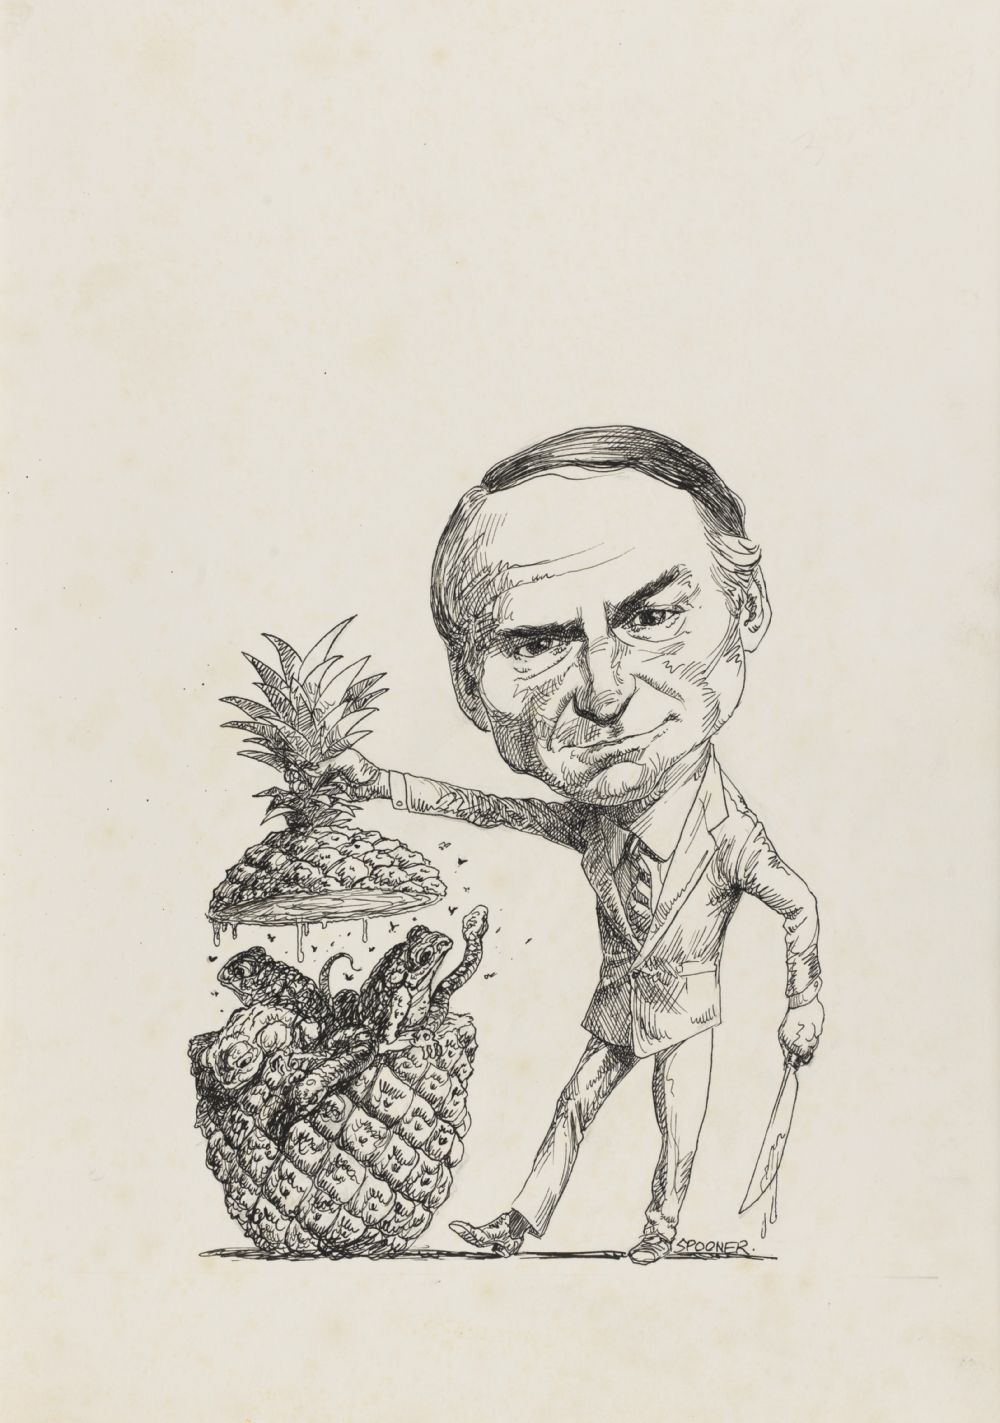  Tony Fitzgerald uncovering corruption in Queensland: A pineapple filled with toads and snakes 